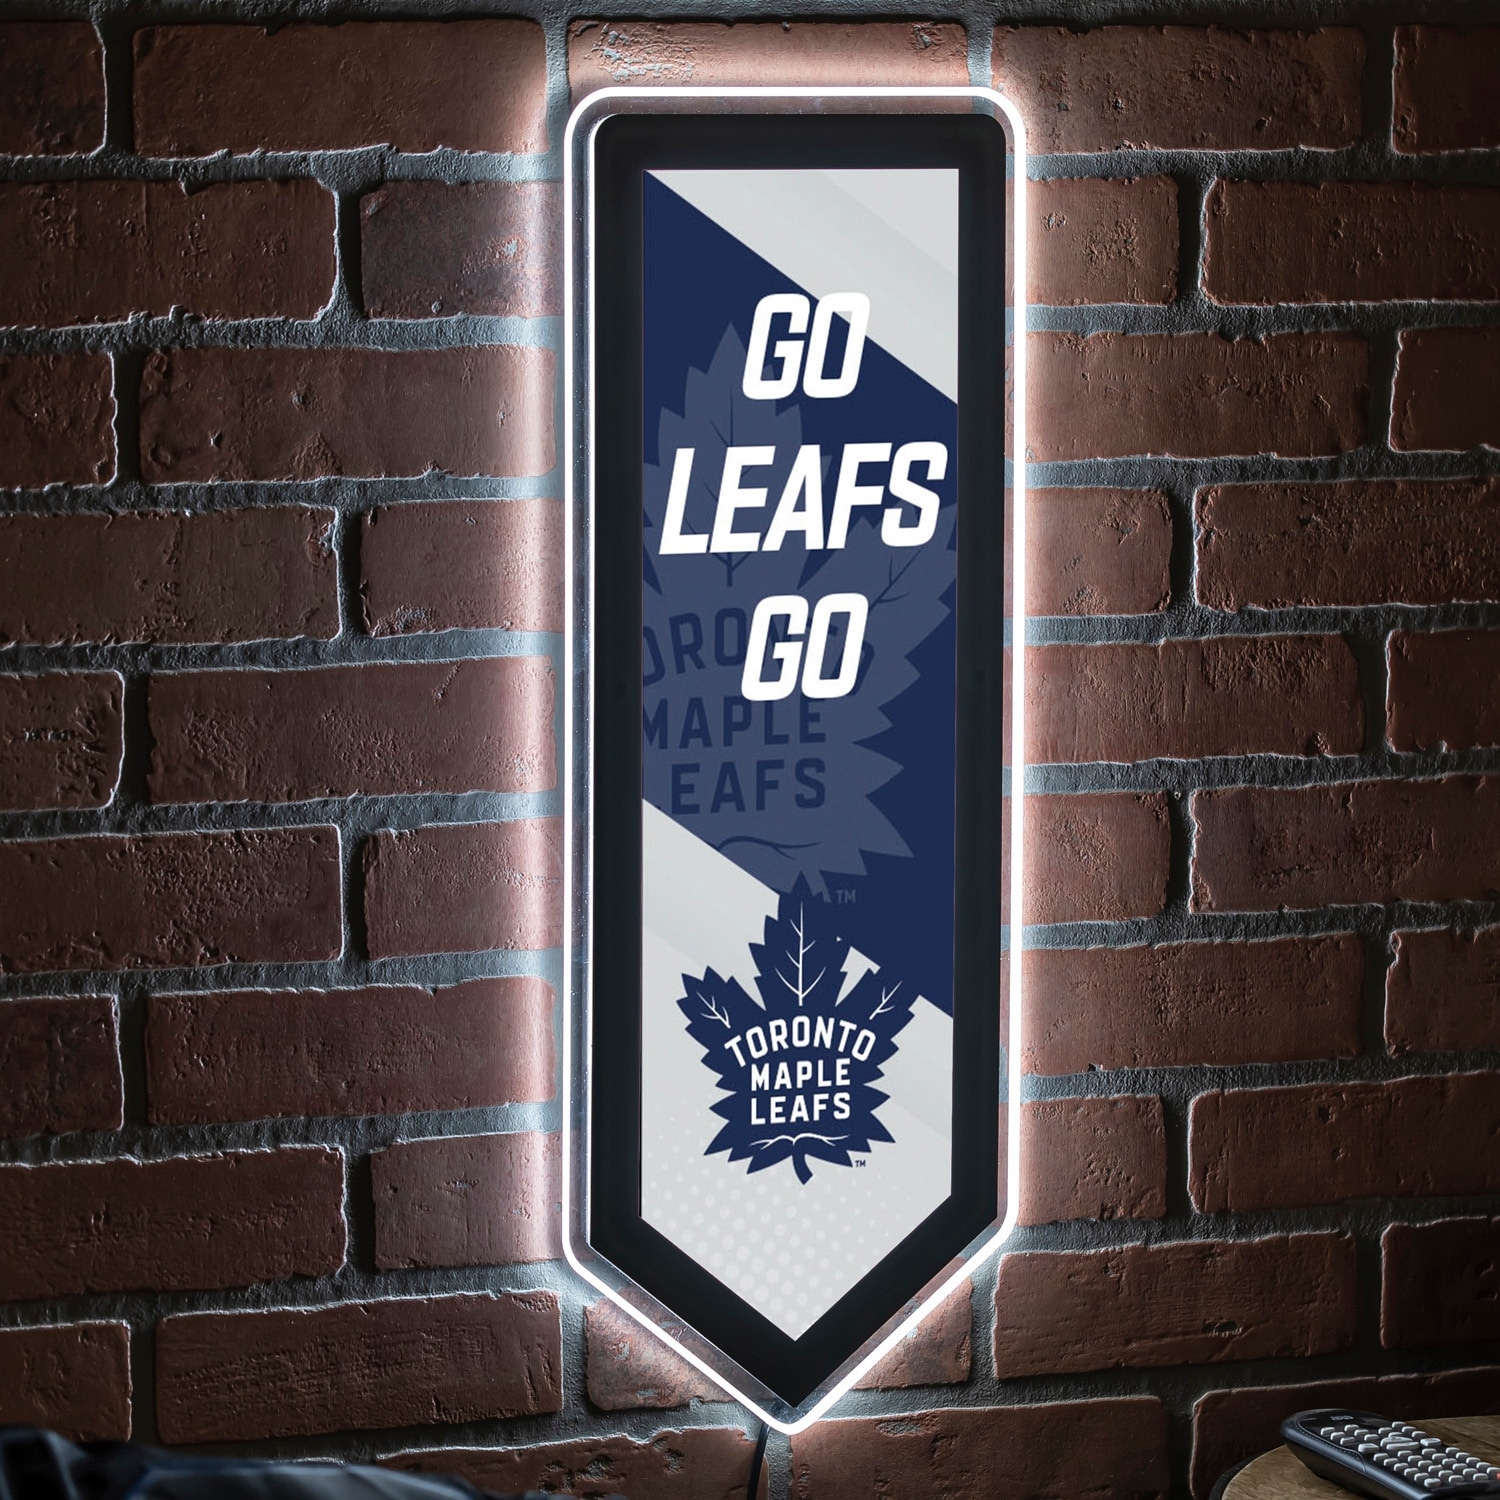 Toronto Maple Leafs LED Lighted Sign - Grey